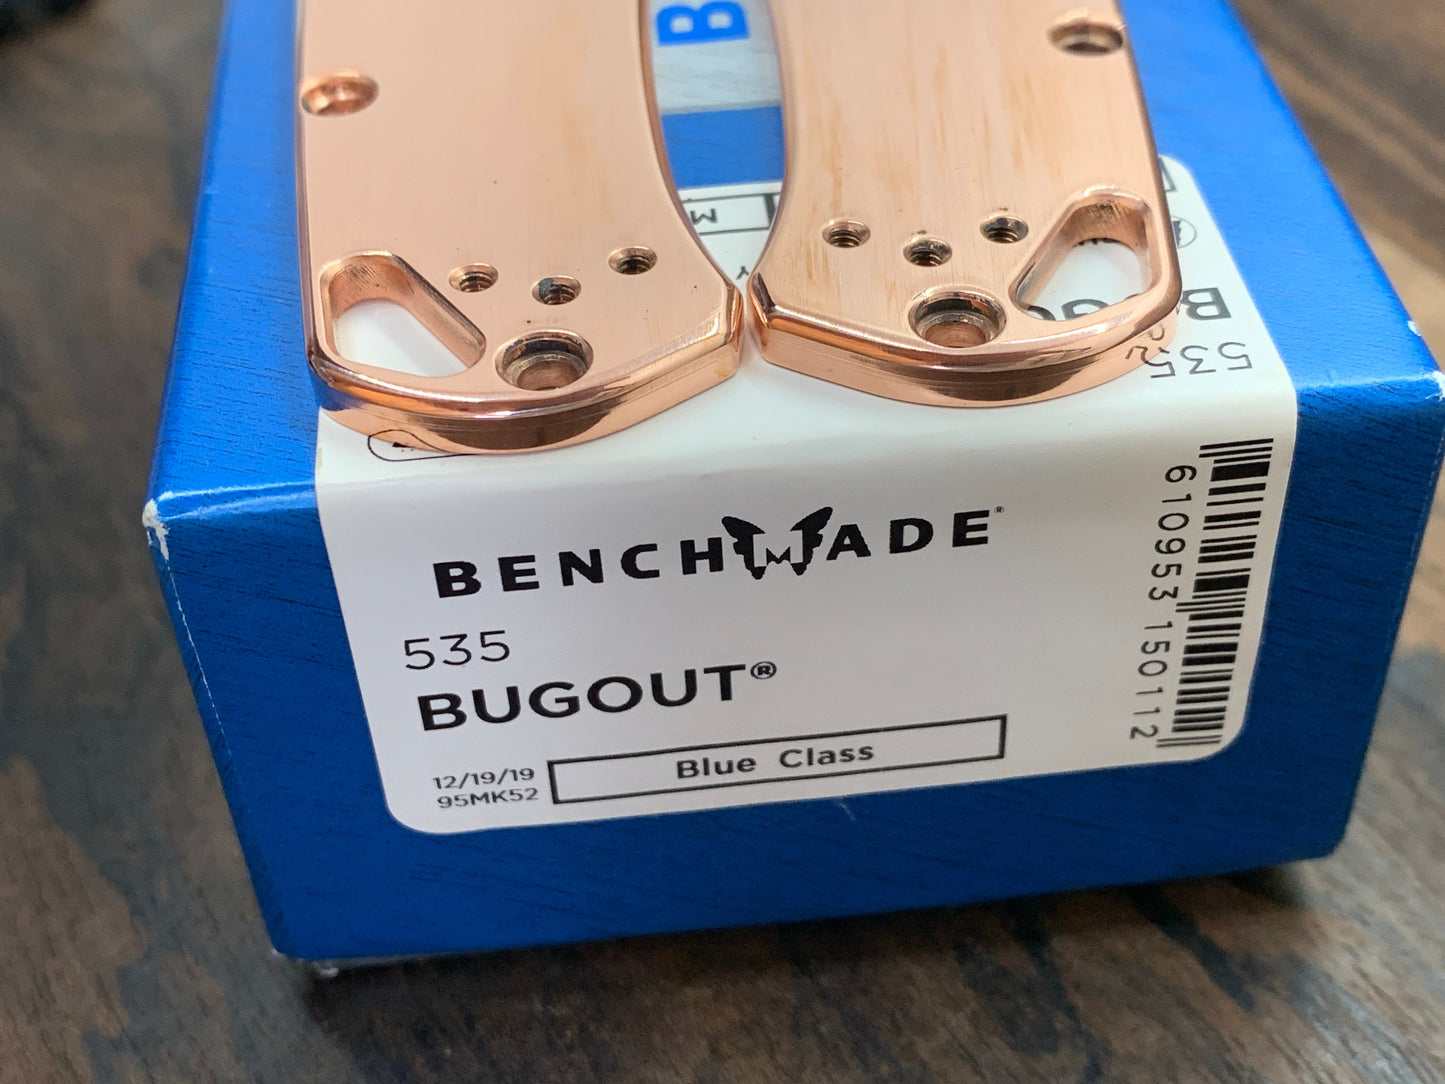 Polished Copper Scales for Benchmade Bugout 535